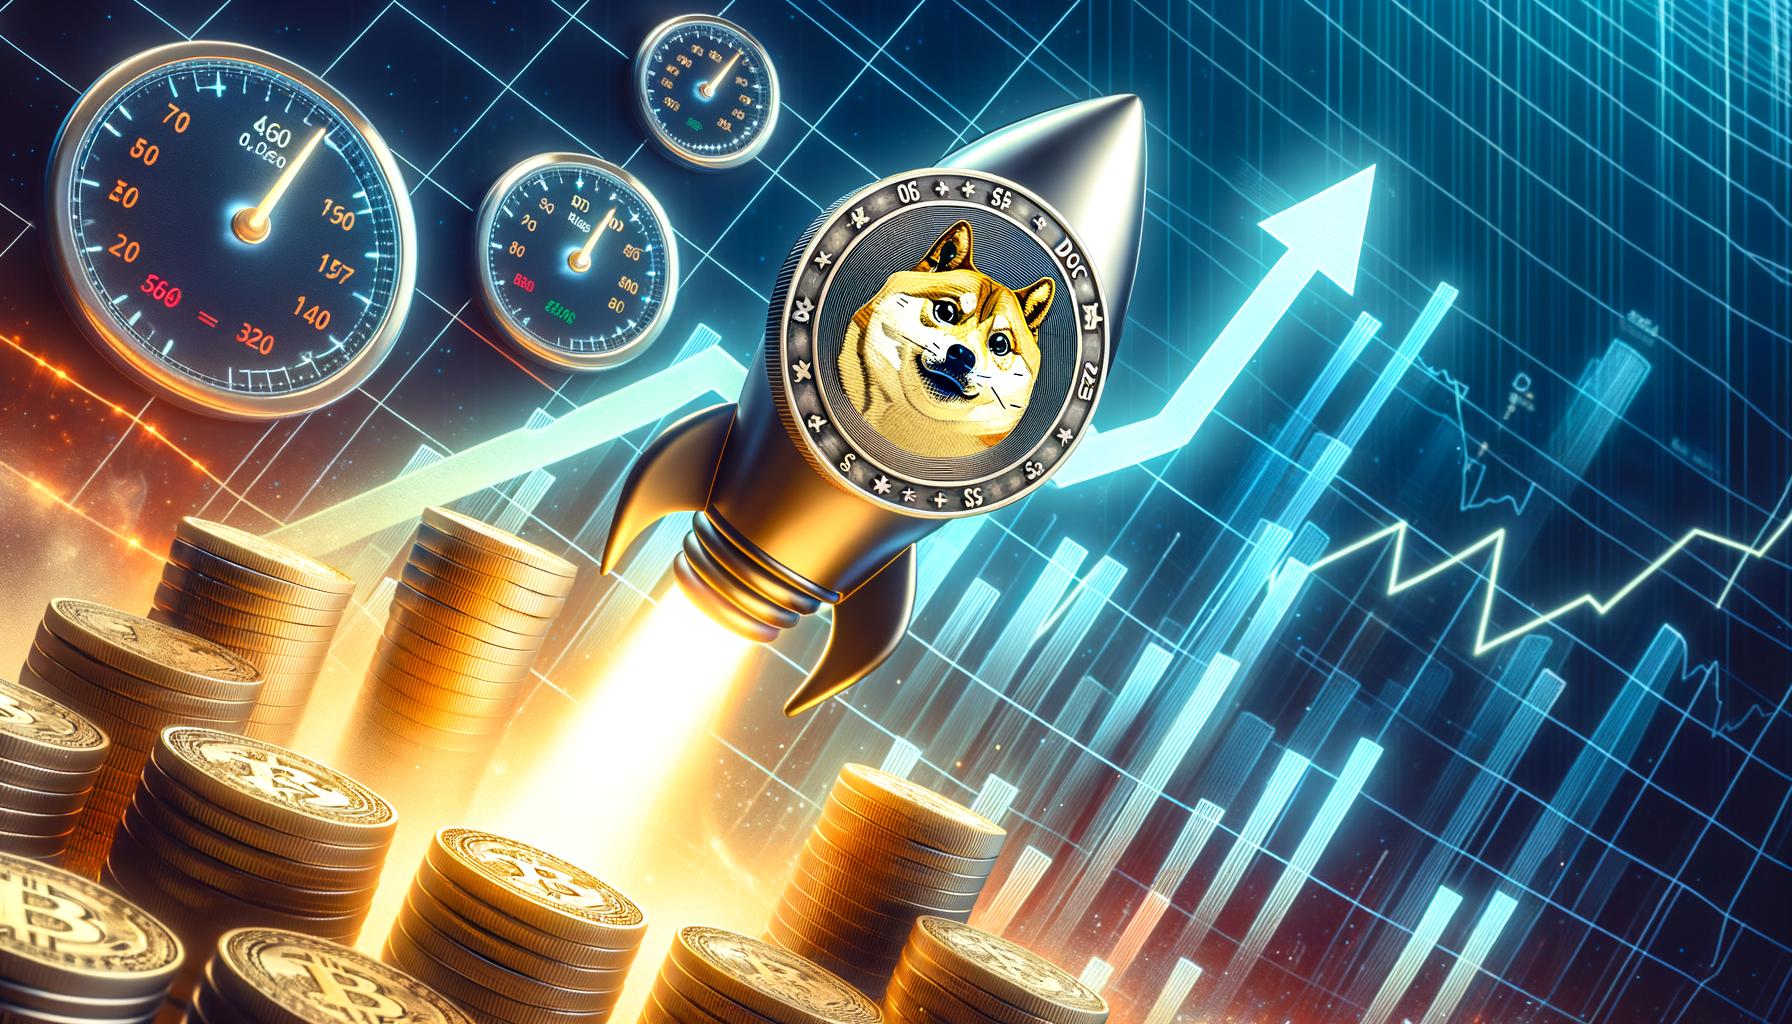 Is Dogecoin About to Take Off? Indicators Suggest Upward Momentum Ahead